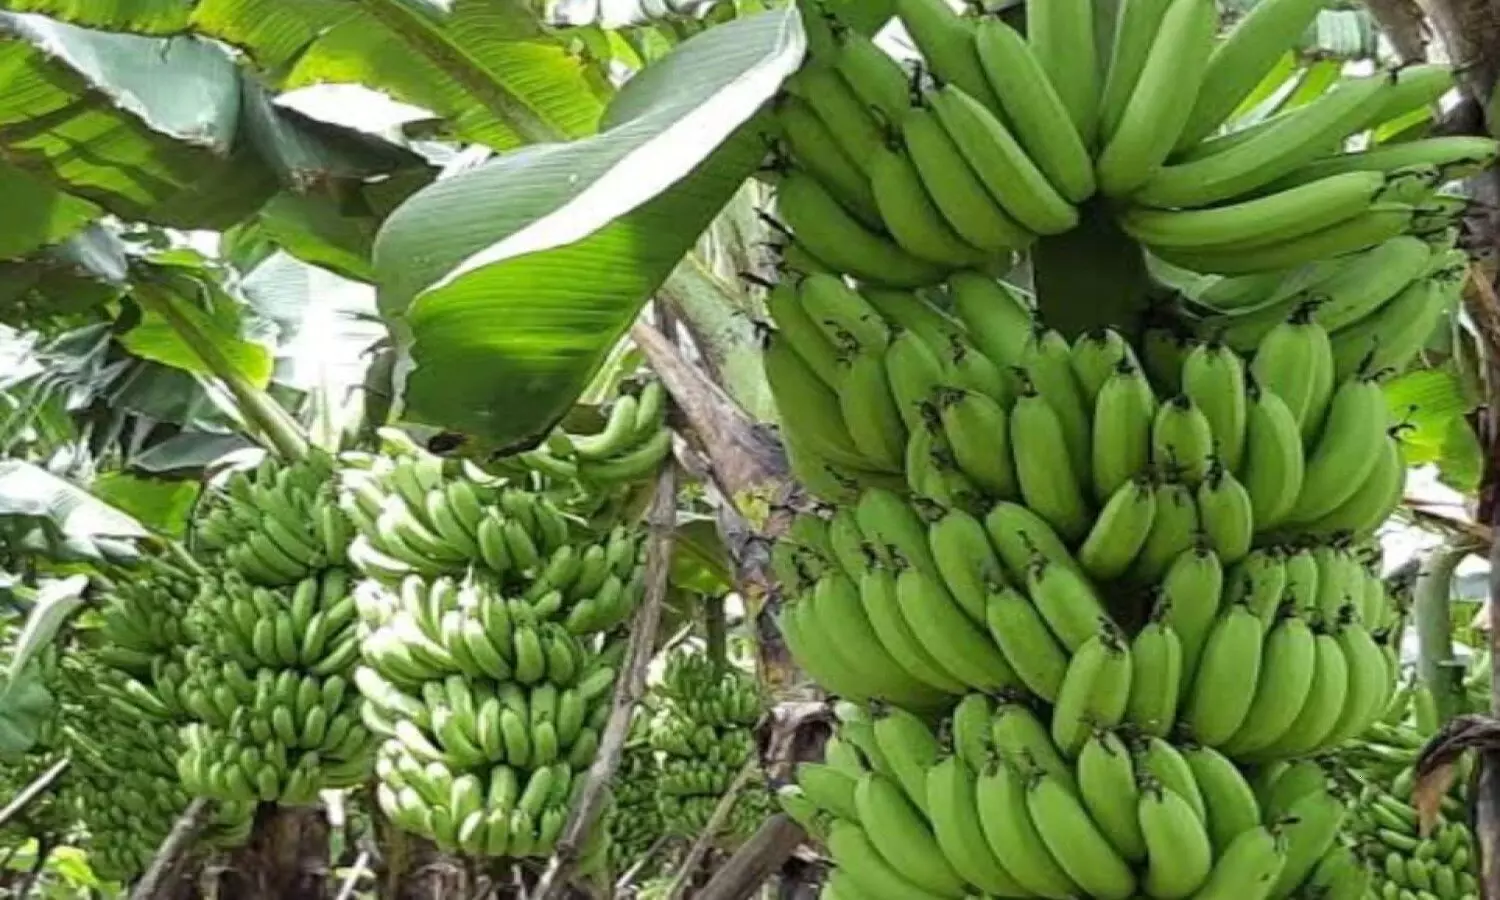 Banana plant is sown by tissue culture method